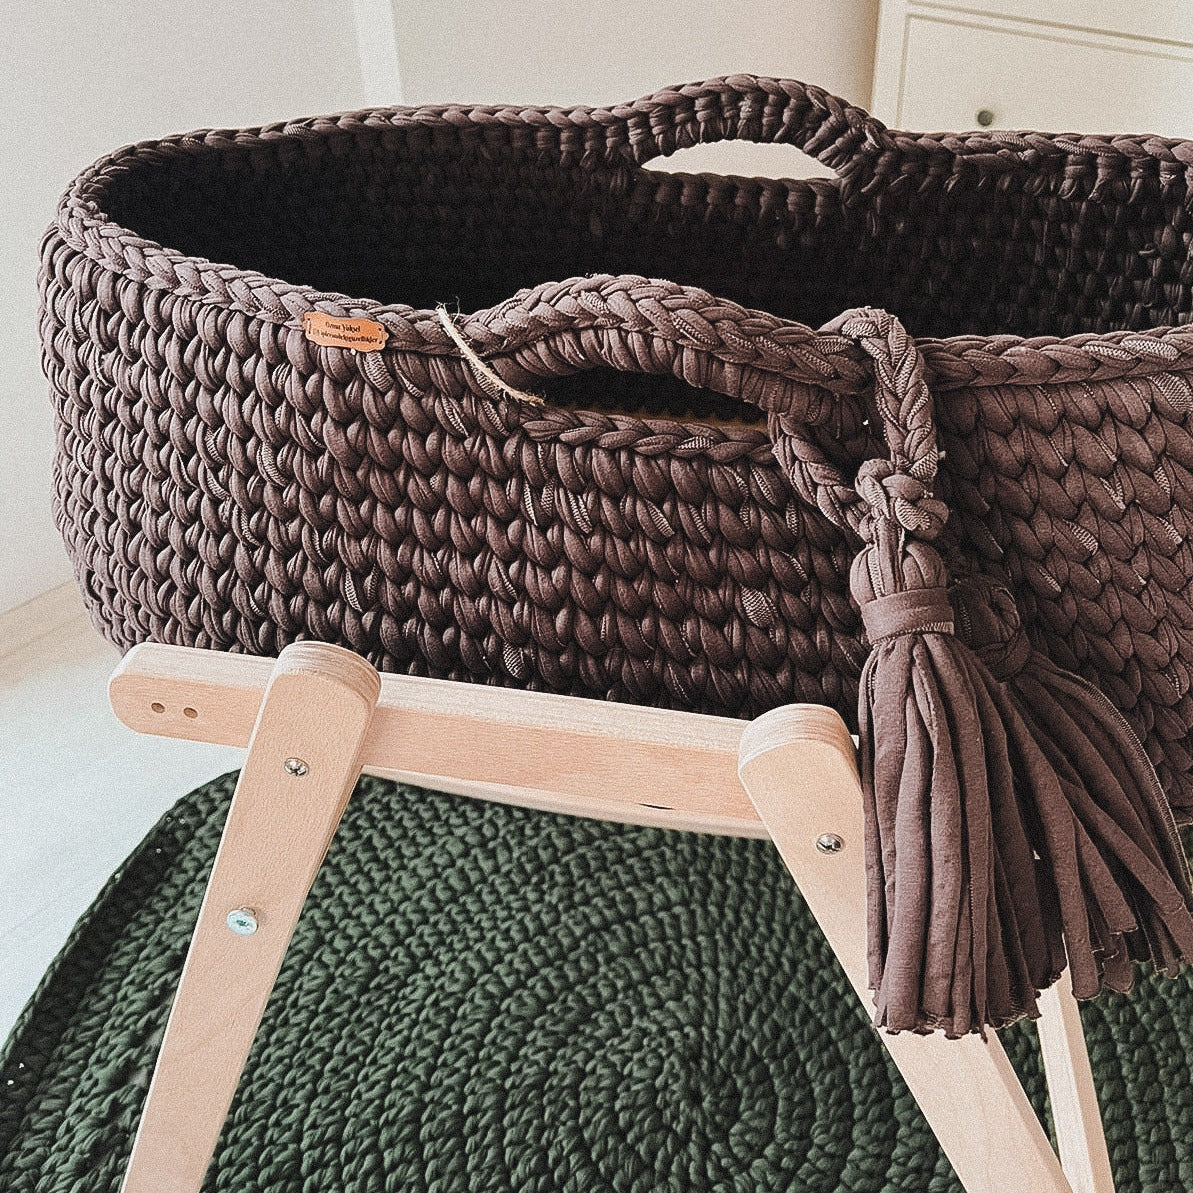 Angel Hand-Knitted Baby Bassinet - Brown